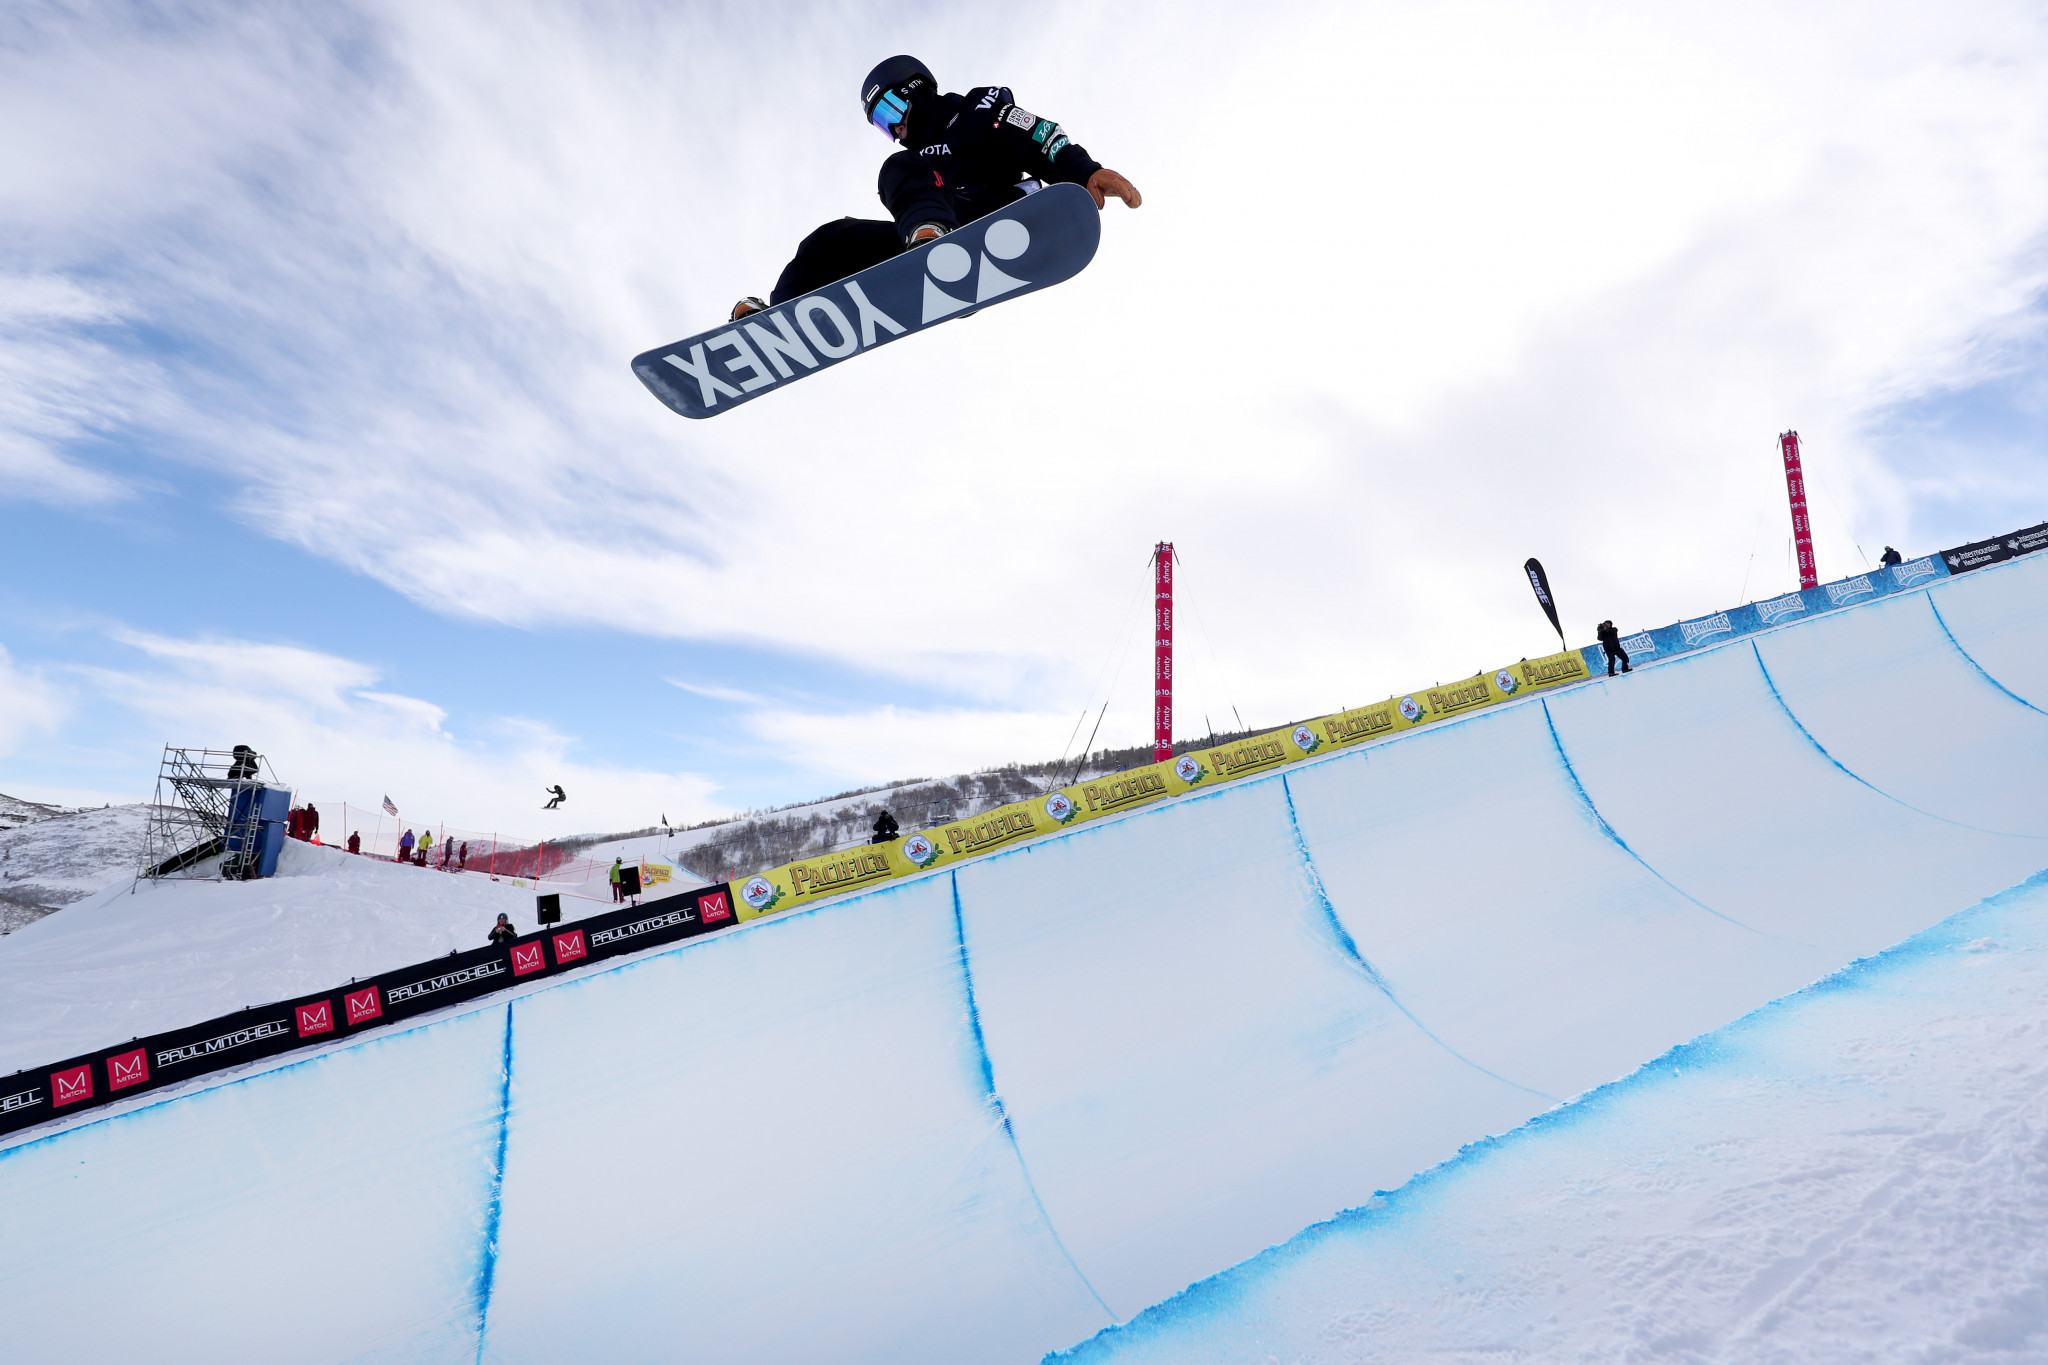 Totsuka backs up qualification performance by clinching halfpipe win at